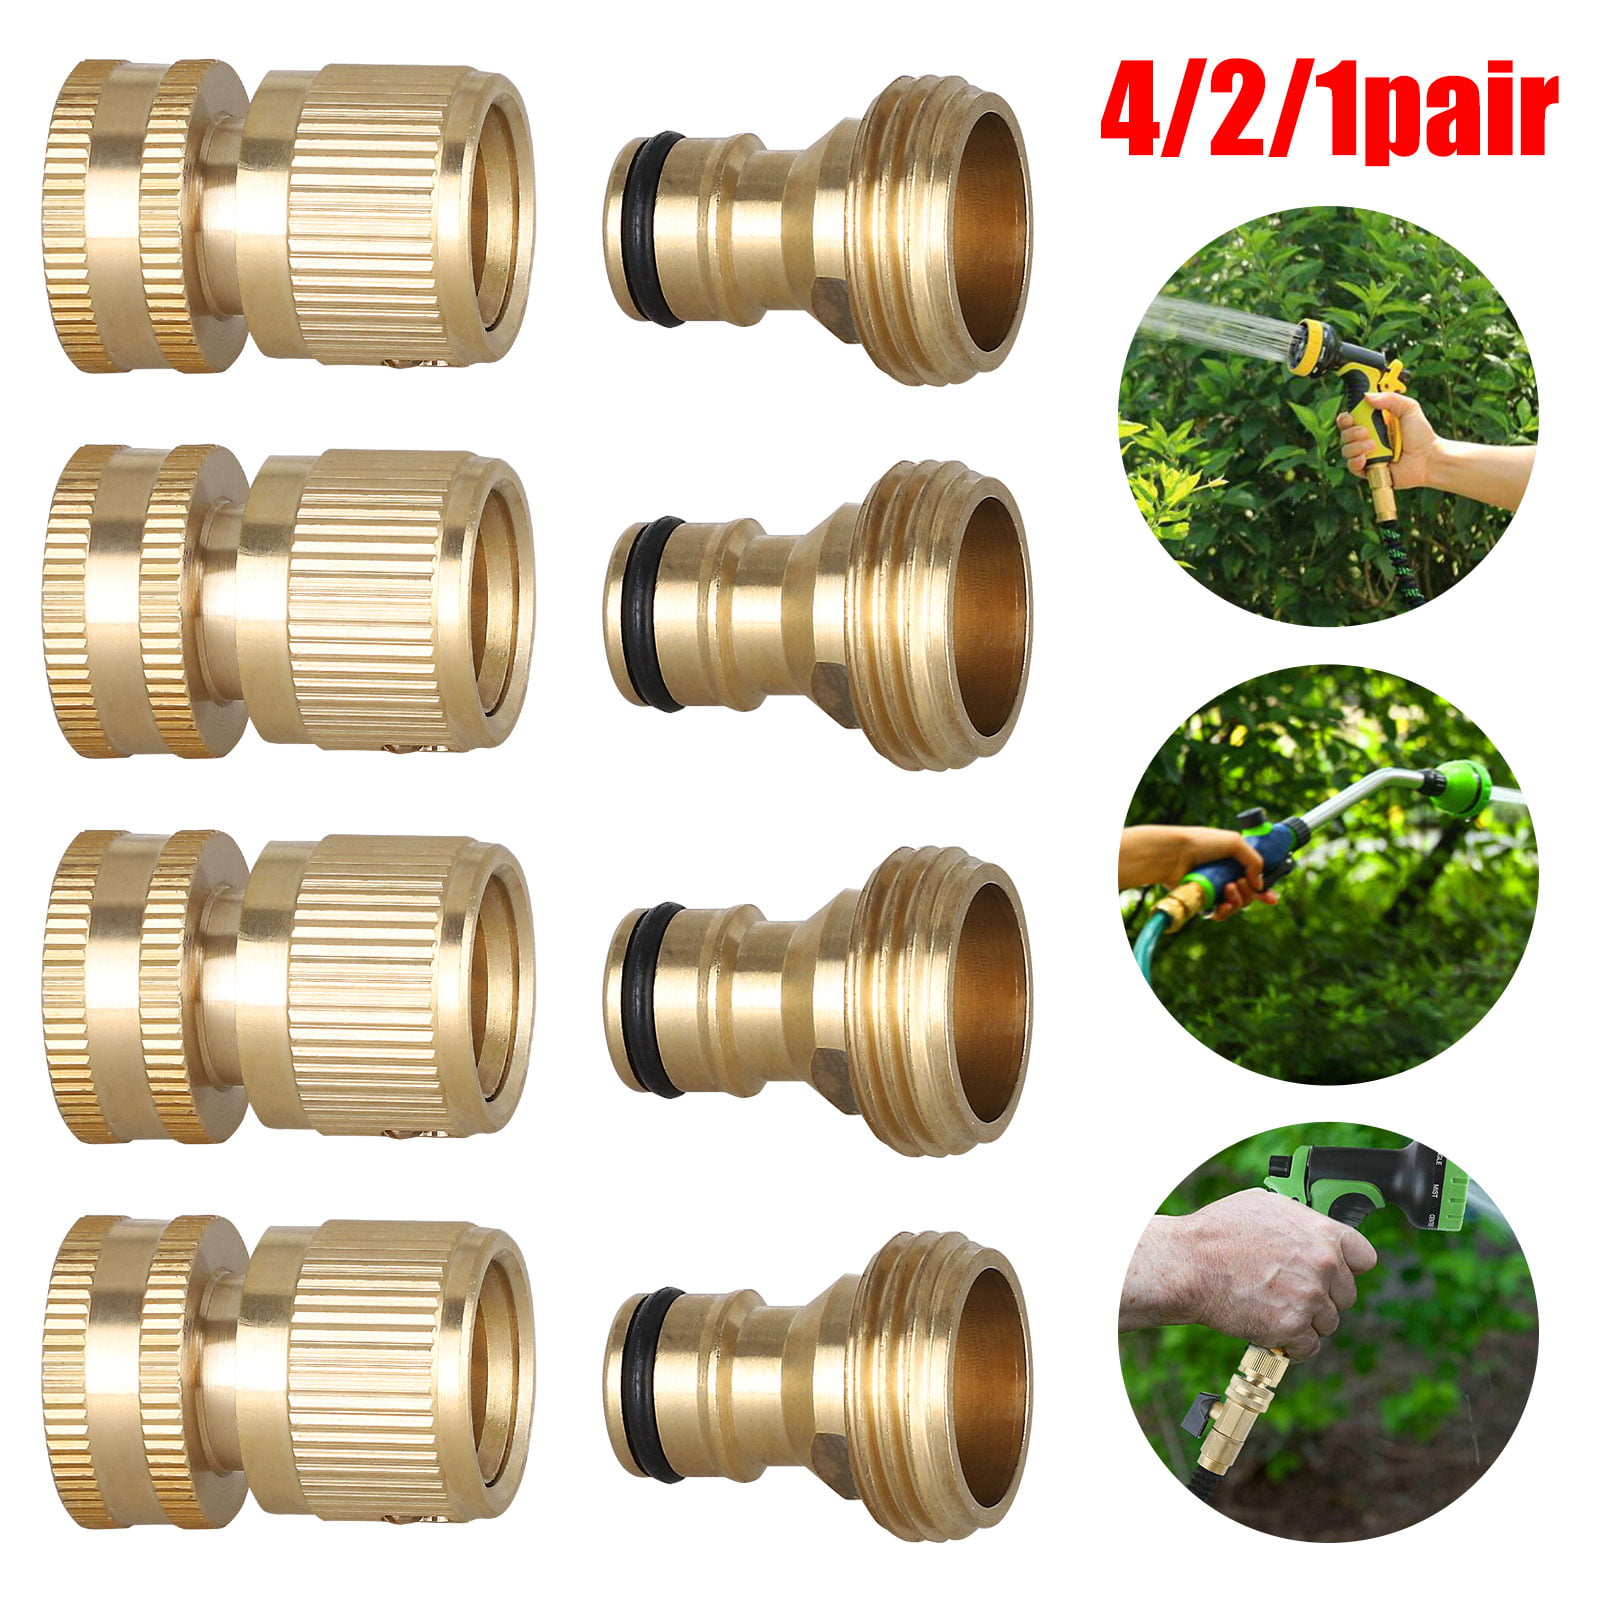 3/4' Garden Hose Quick Connect Water Hose Fit Brass Female Male Connector Set 